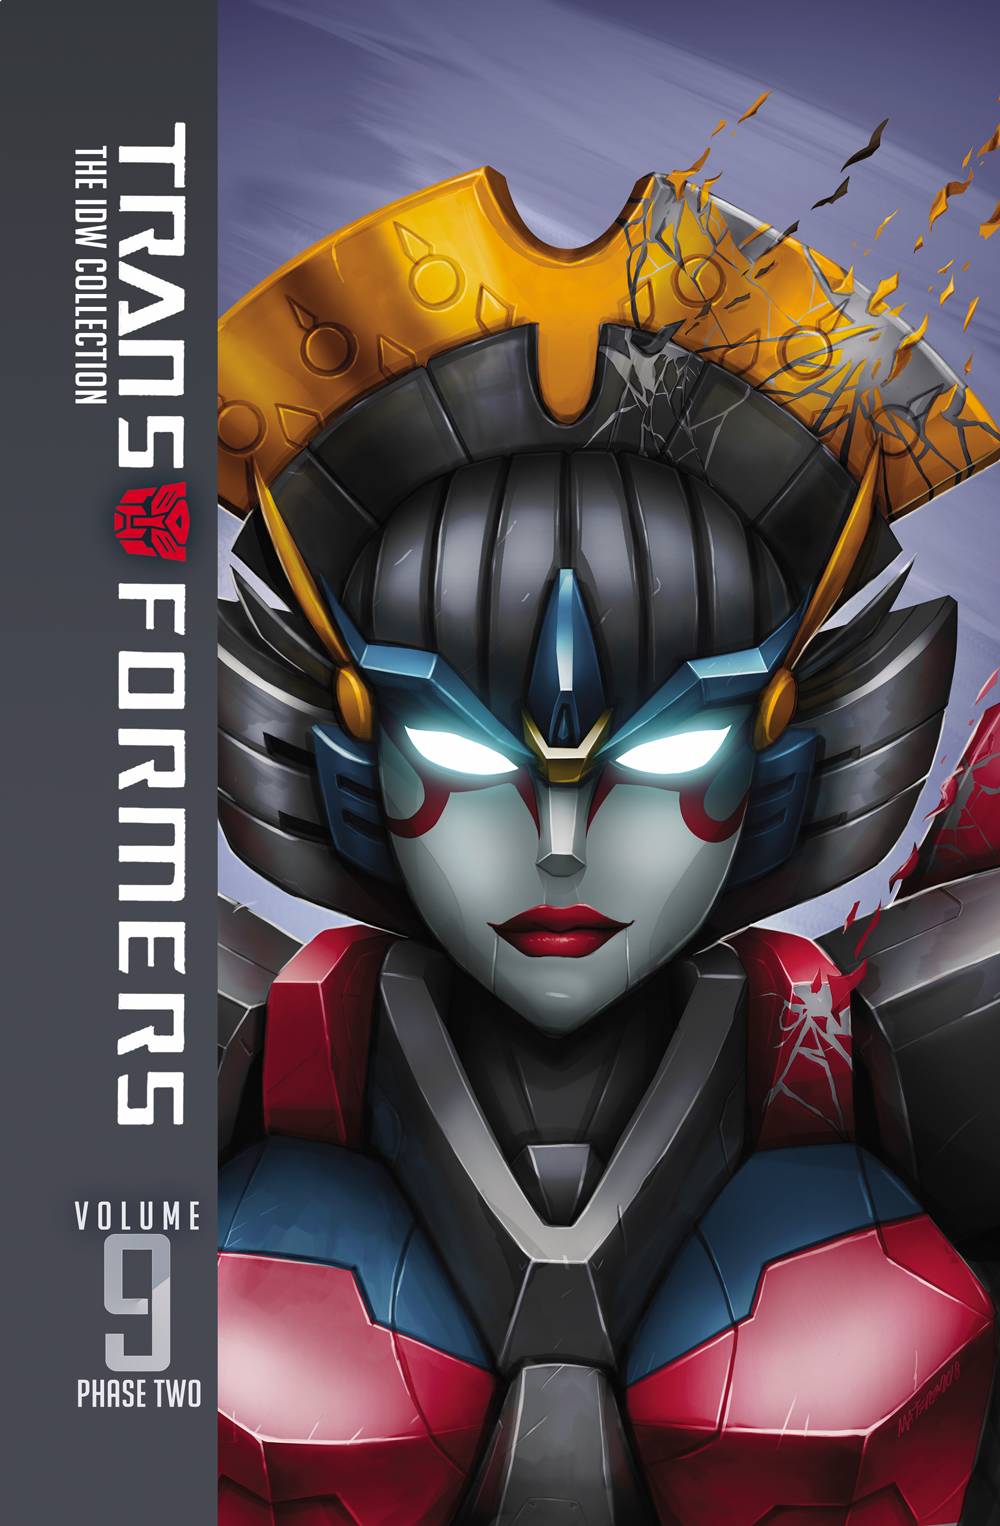 Transformers IDW Collected Phase 2 Hardcover Volume 9